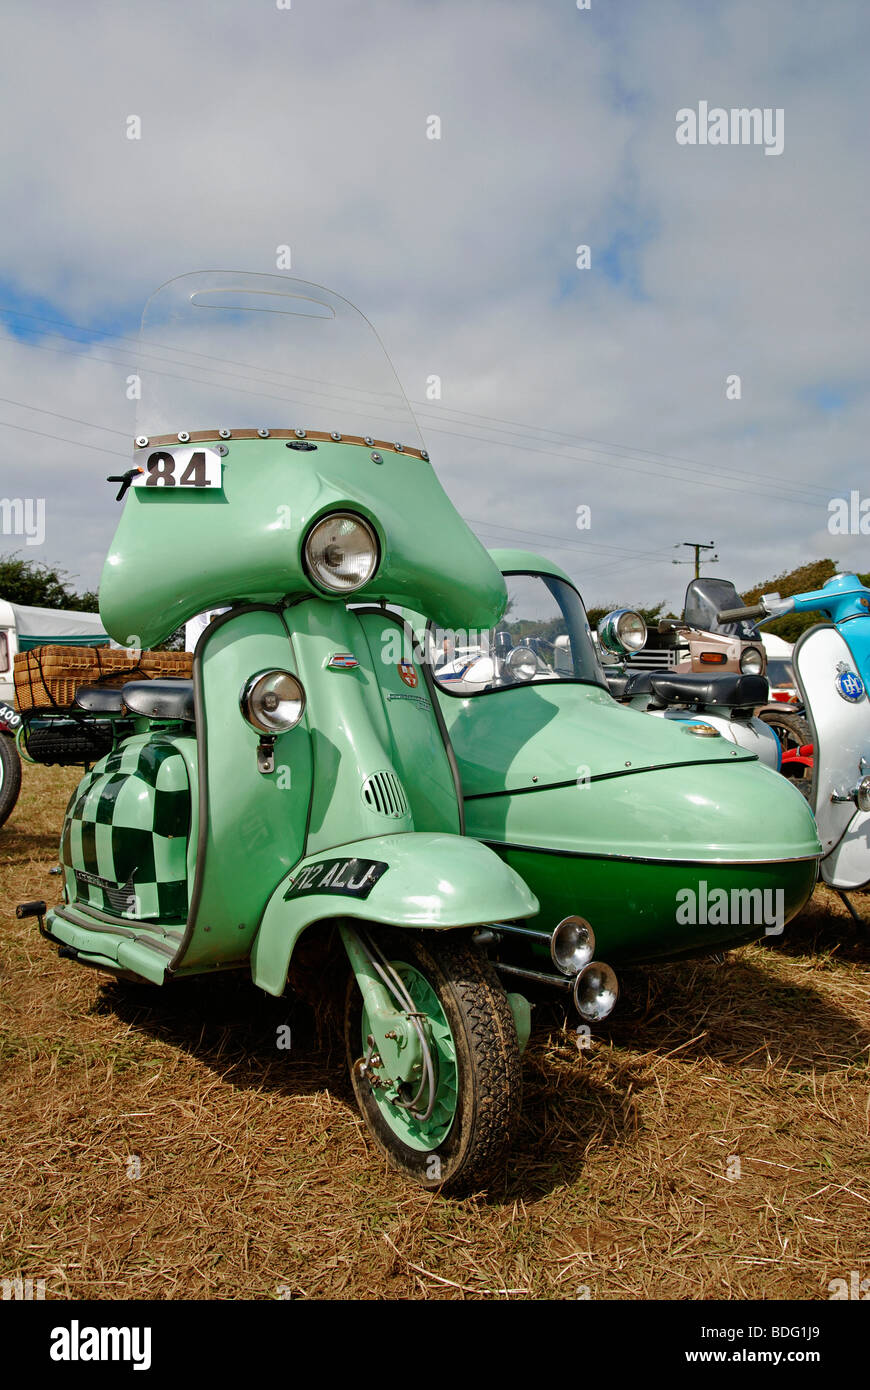 an old lambretta scooter at a vintage rally in cornwall uk Stock Photo